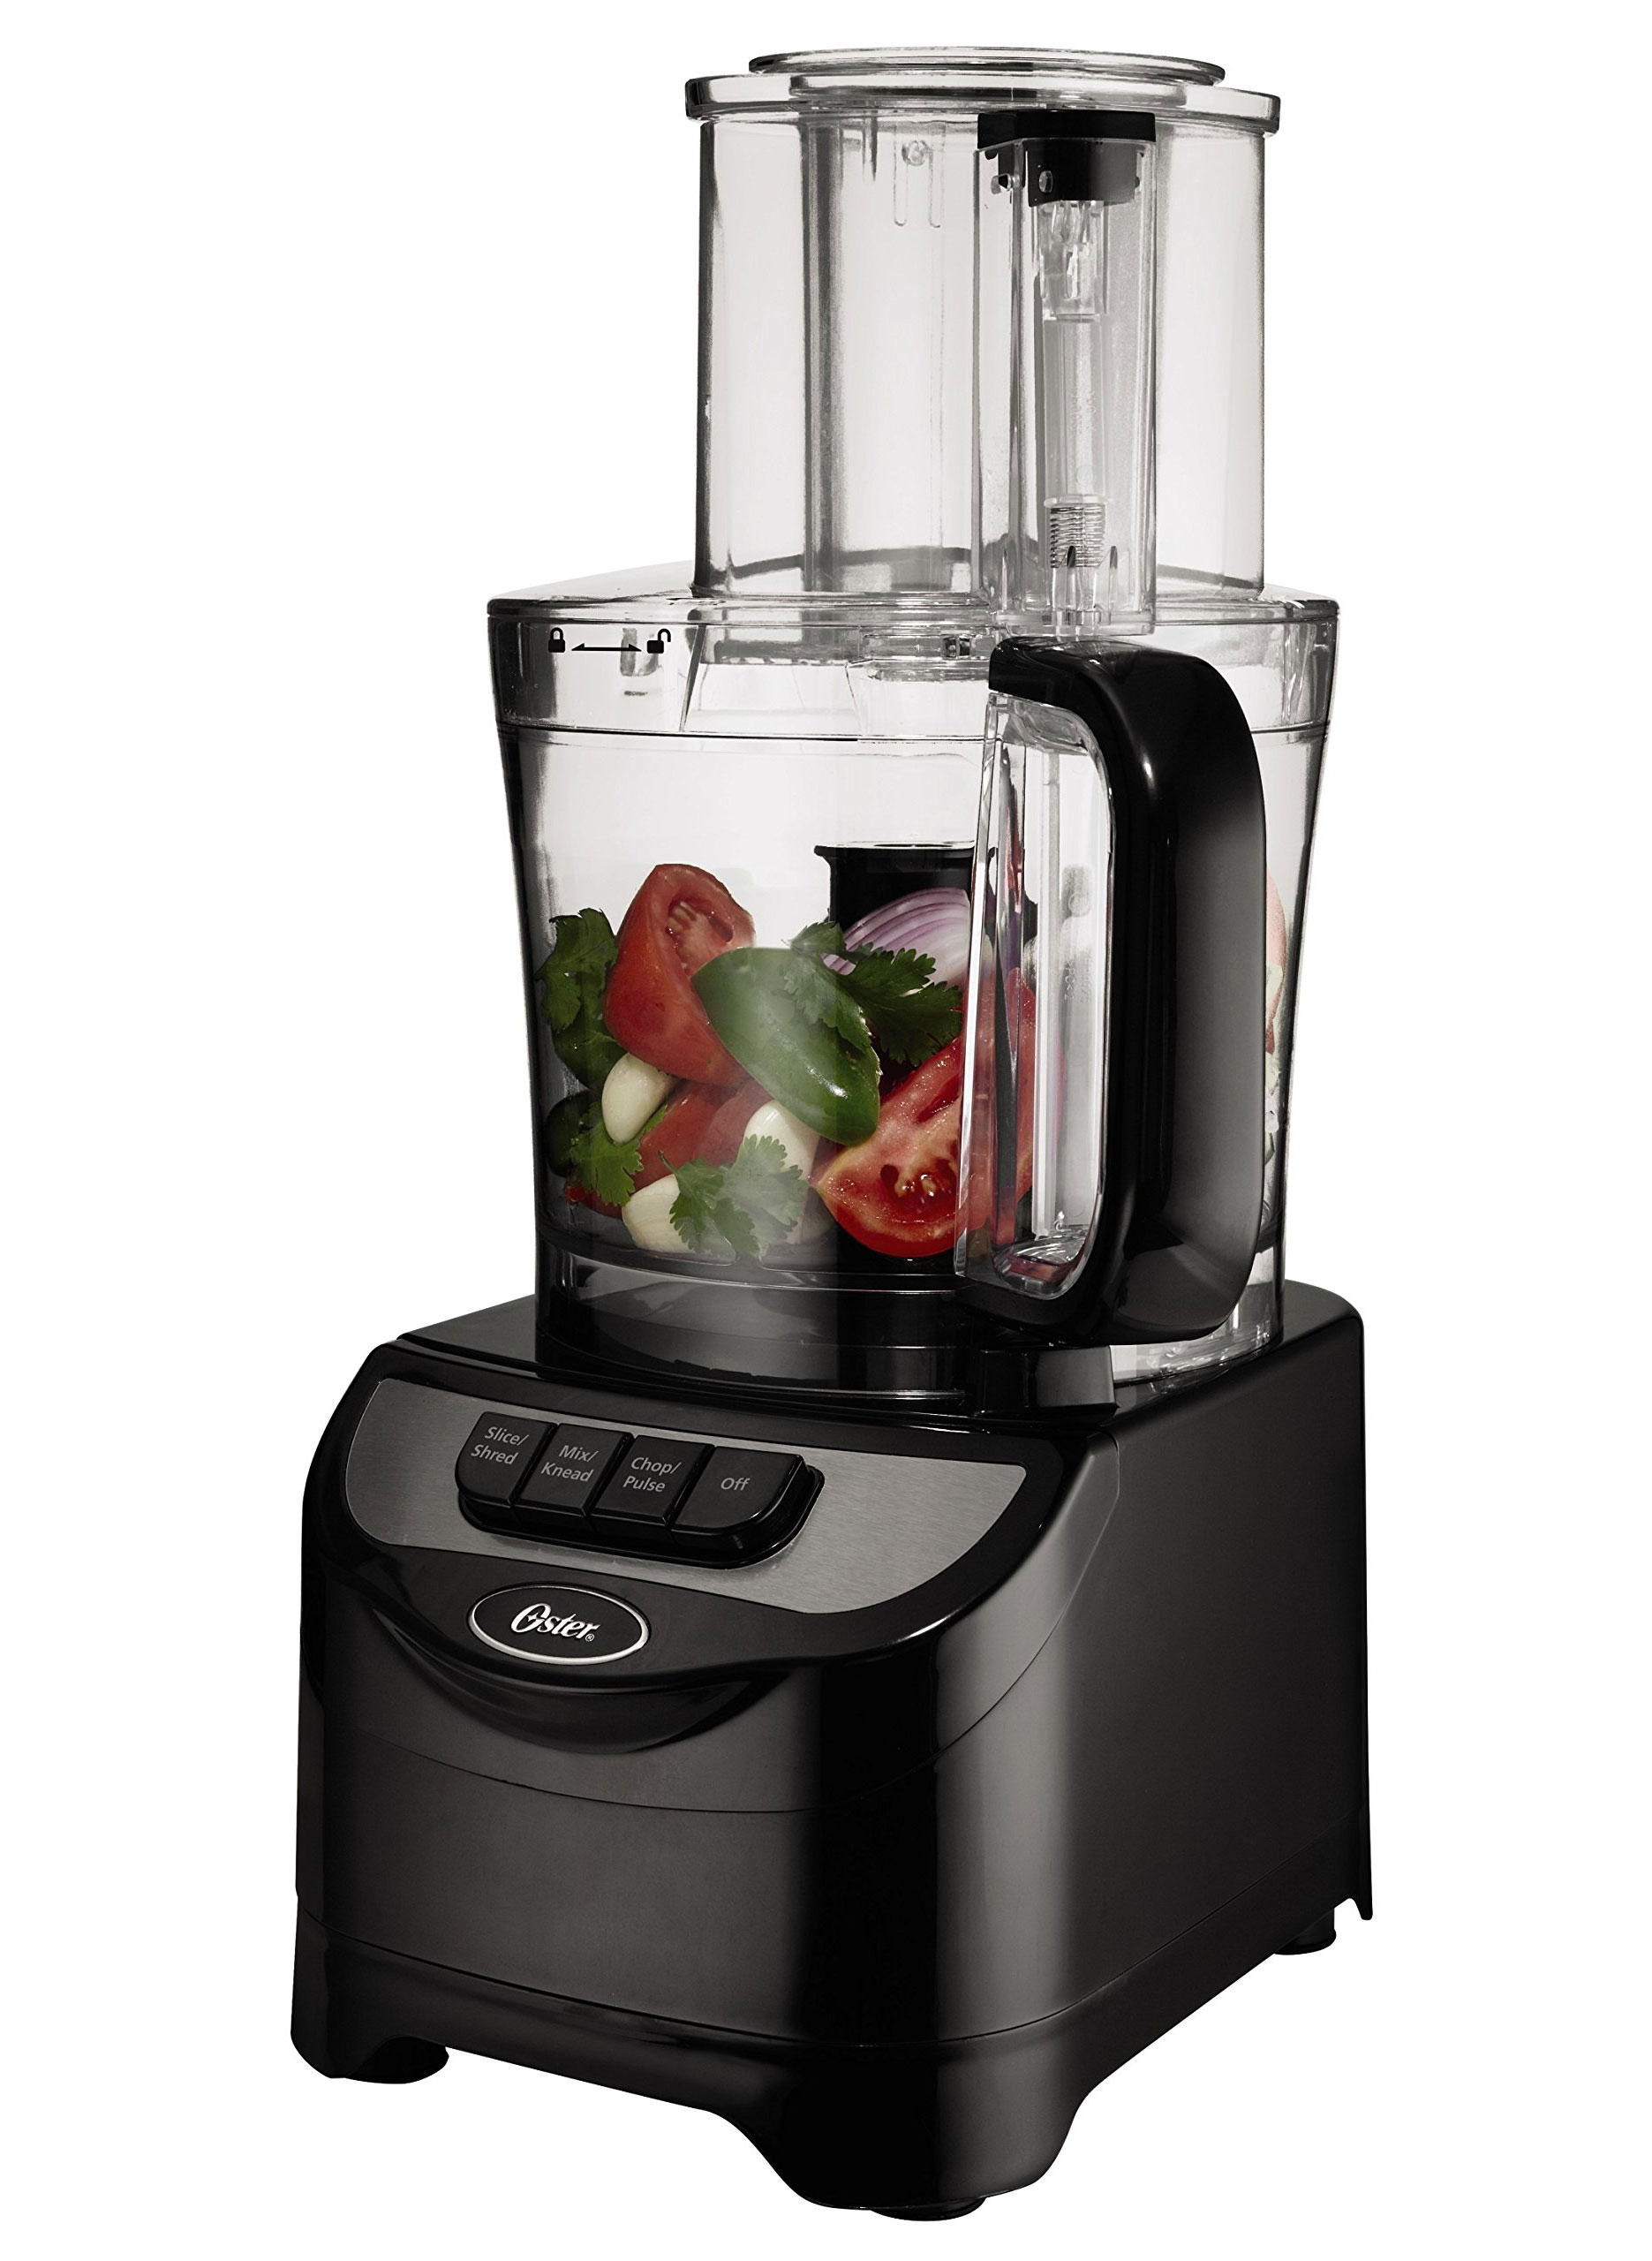 Oster 2-Speed Food Processor